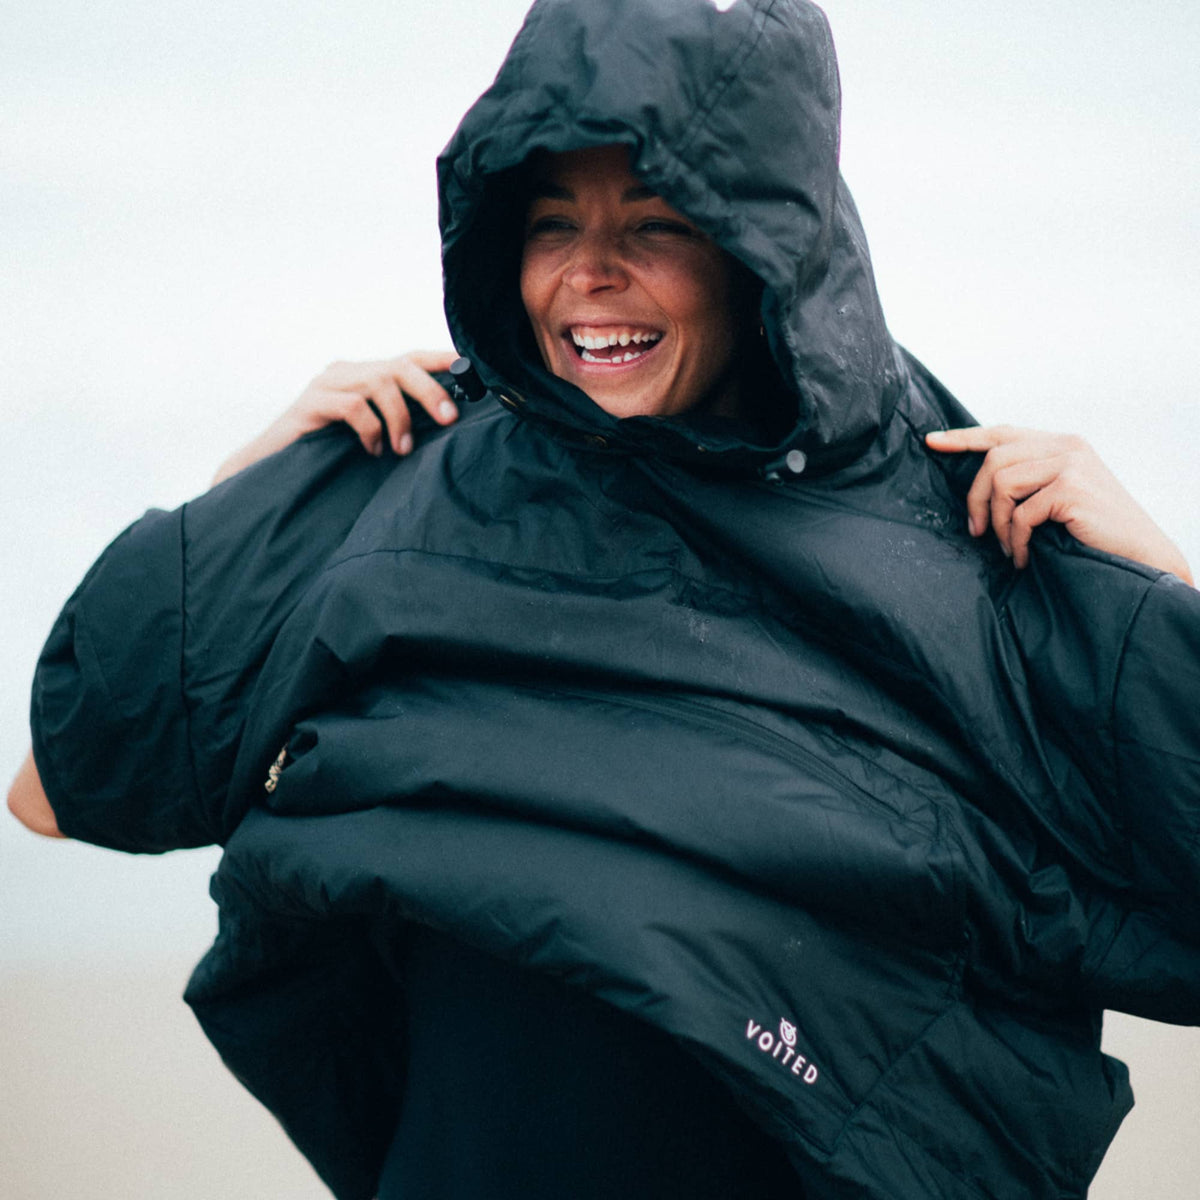 VOITED Outdoor Poncho for Surfing, Camping, Vanlife & Wild Swimming - Black